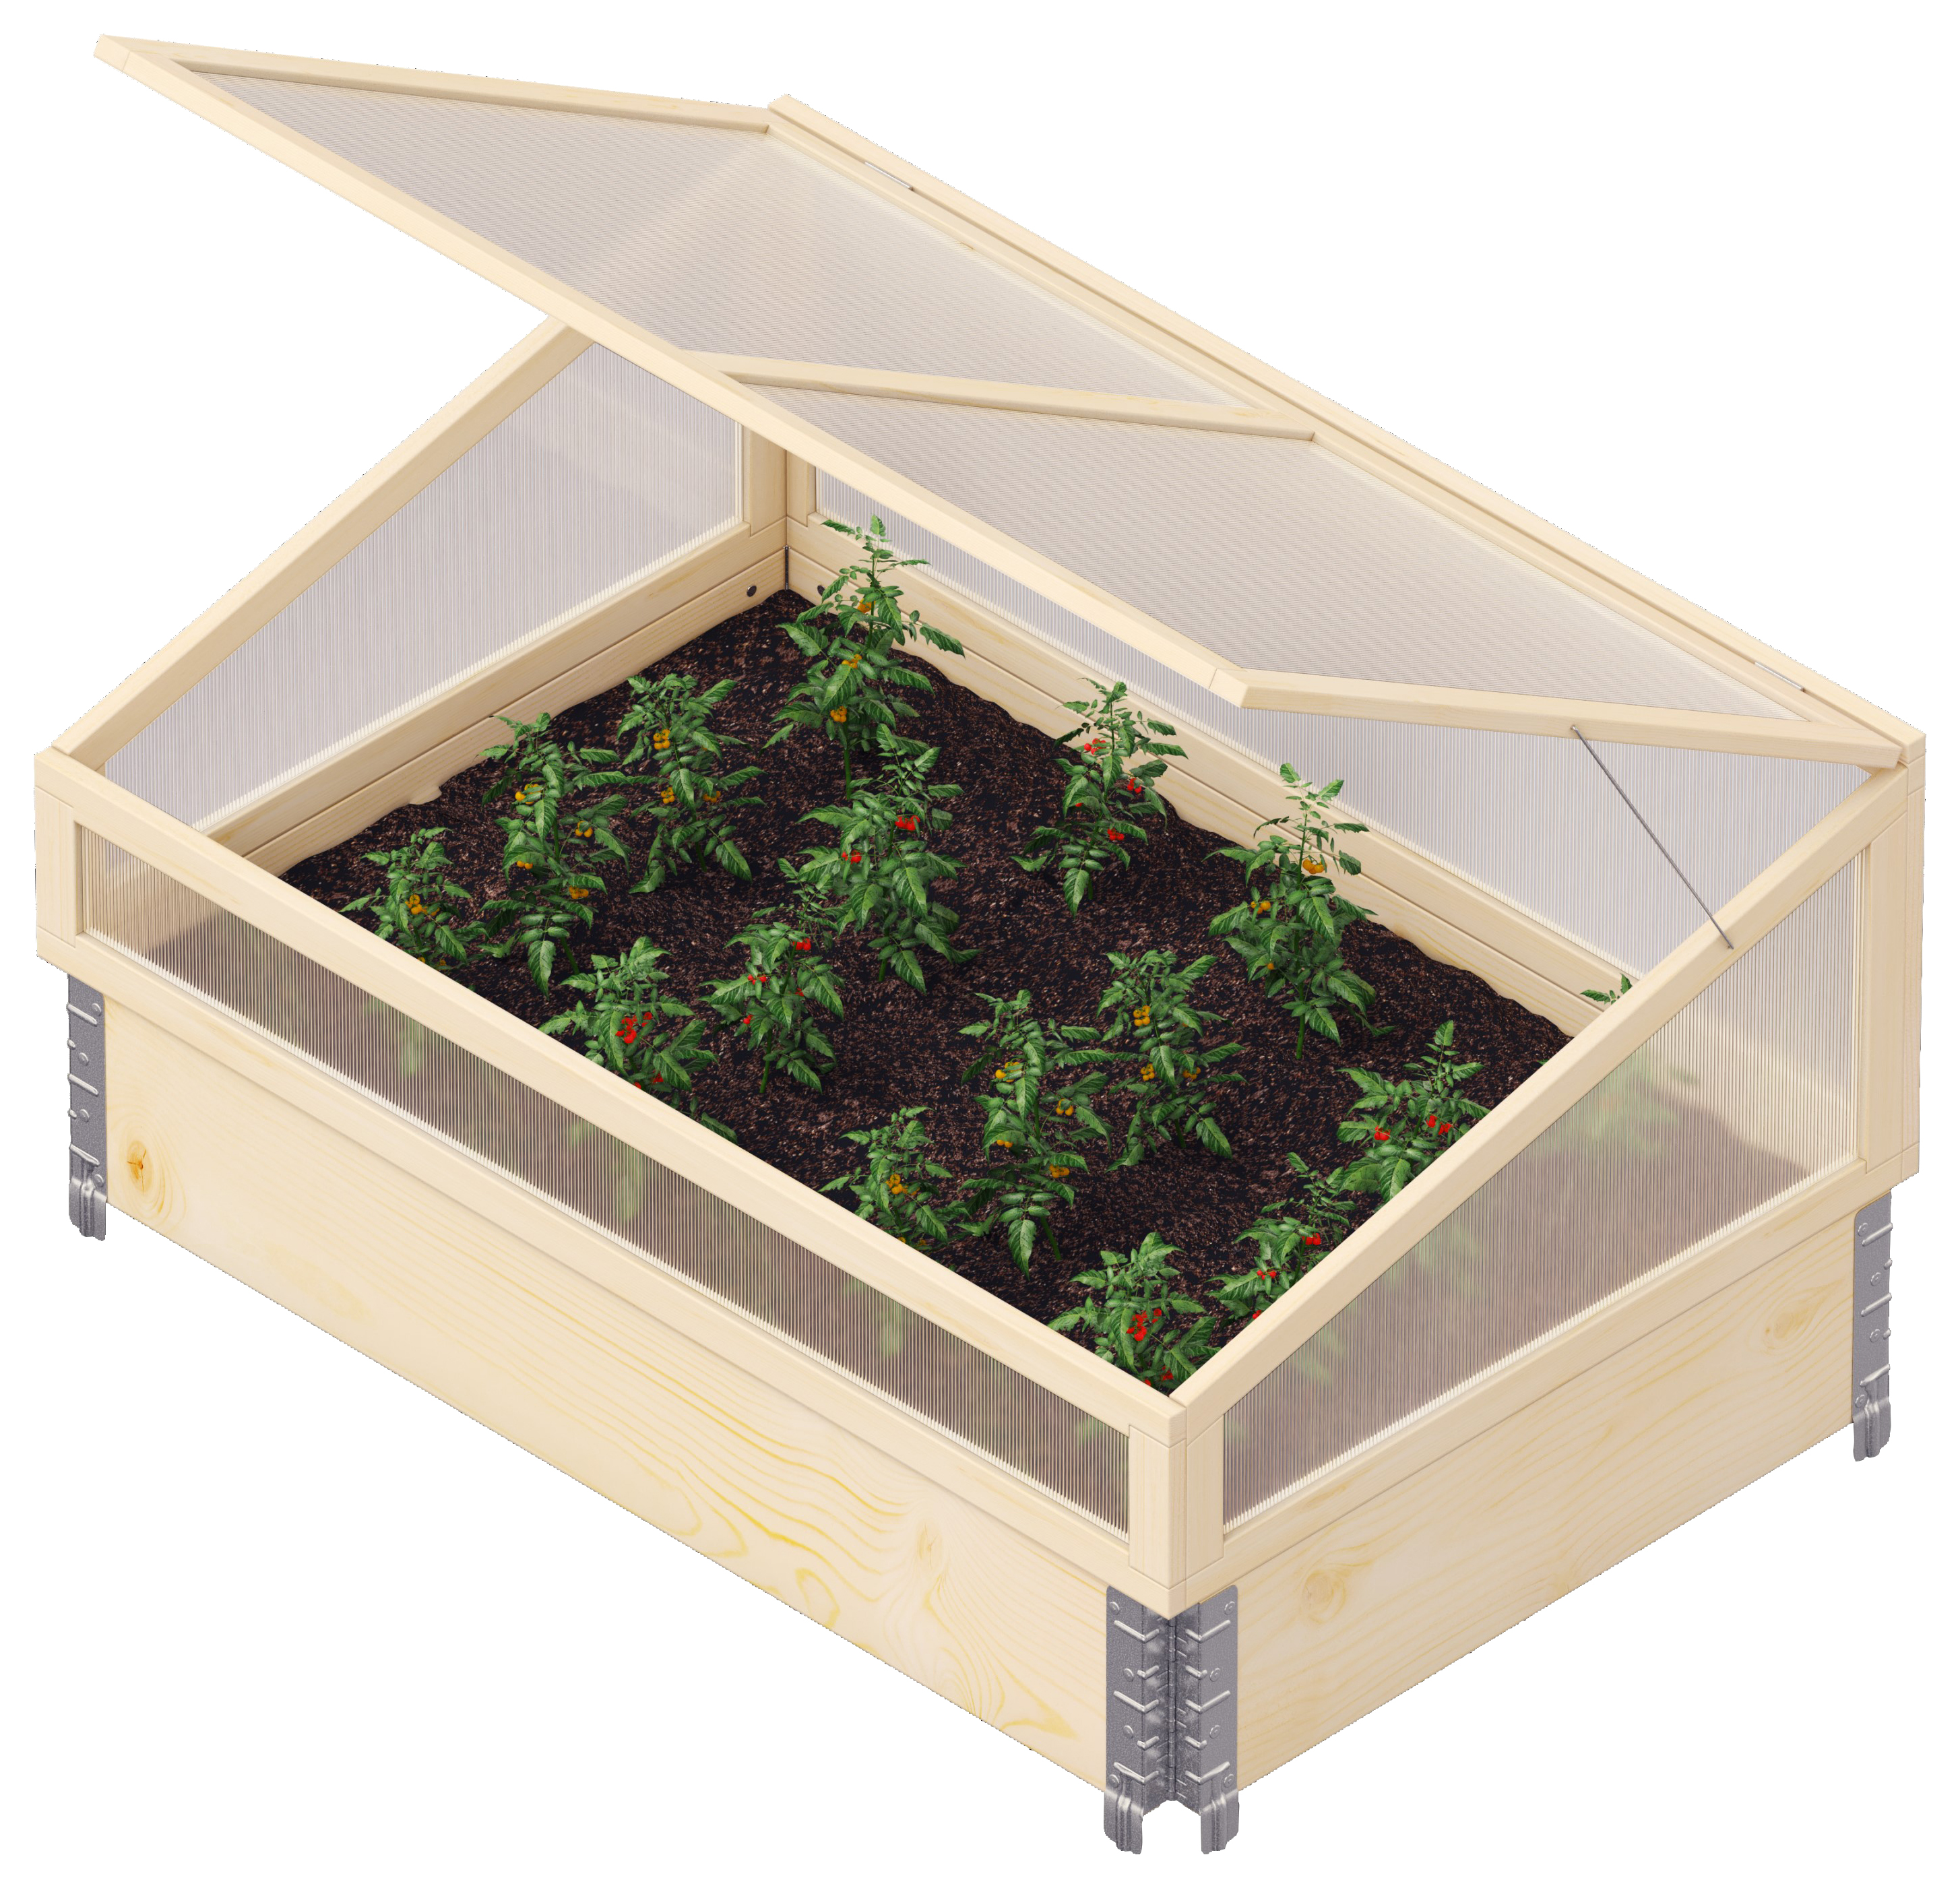 Upyard Natural Greenhouse - 4 x 2ft 6in